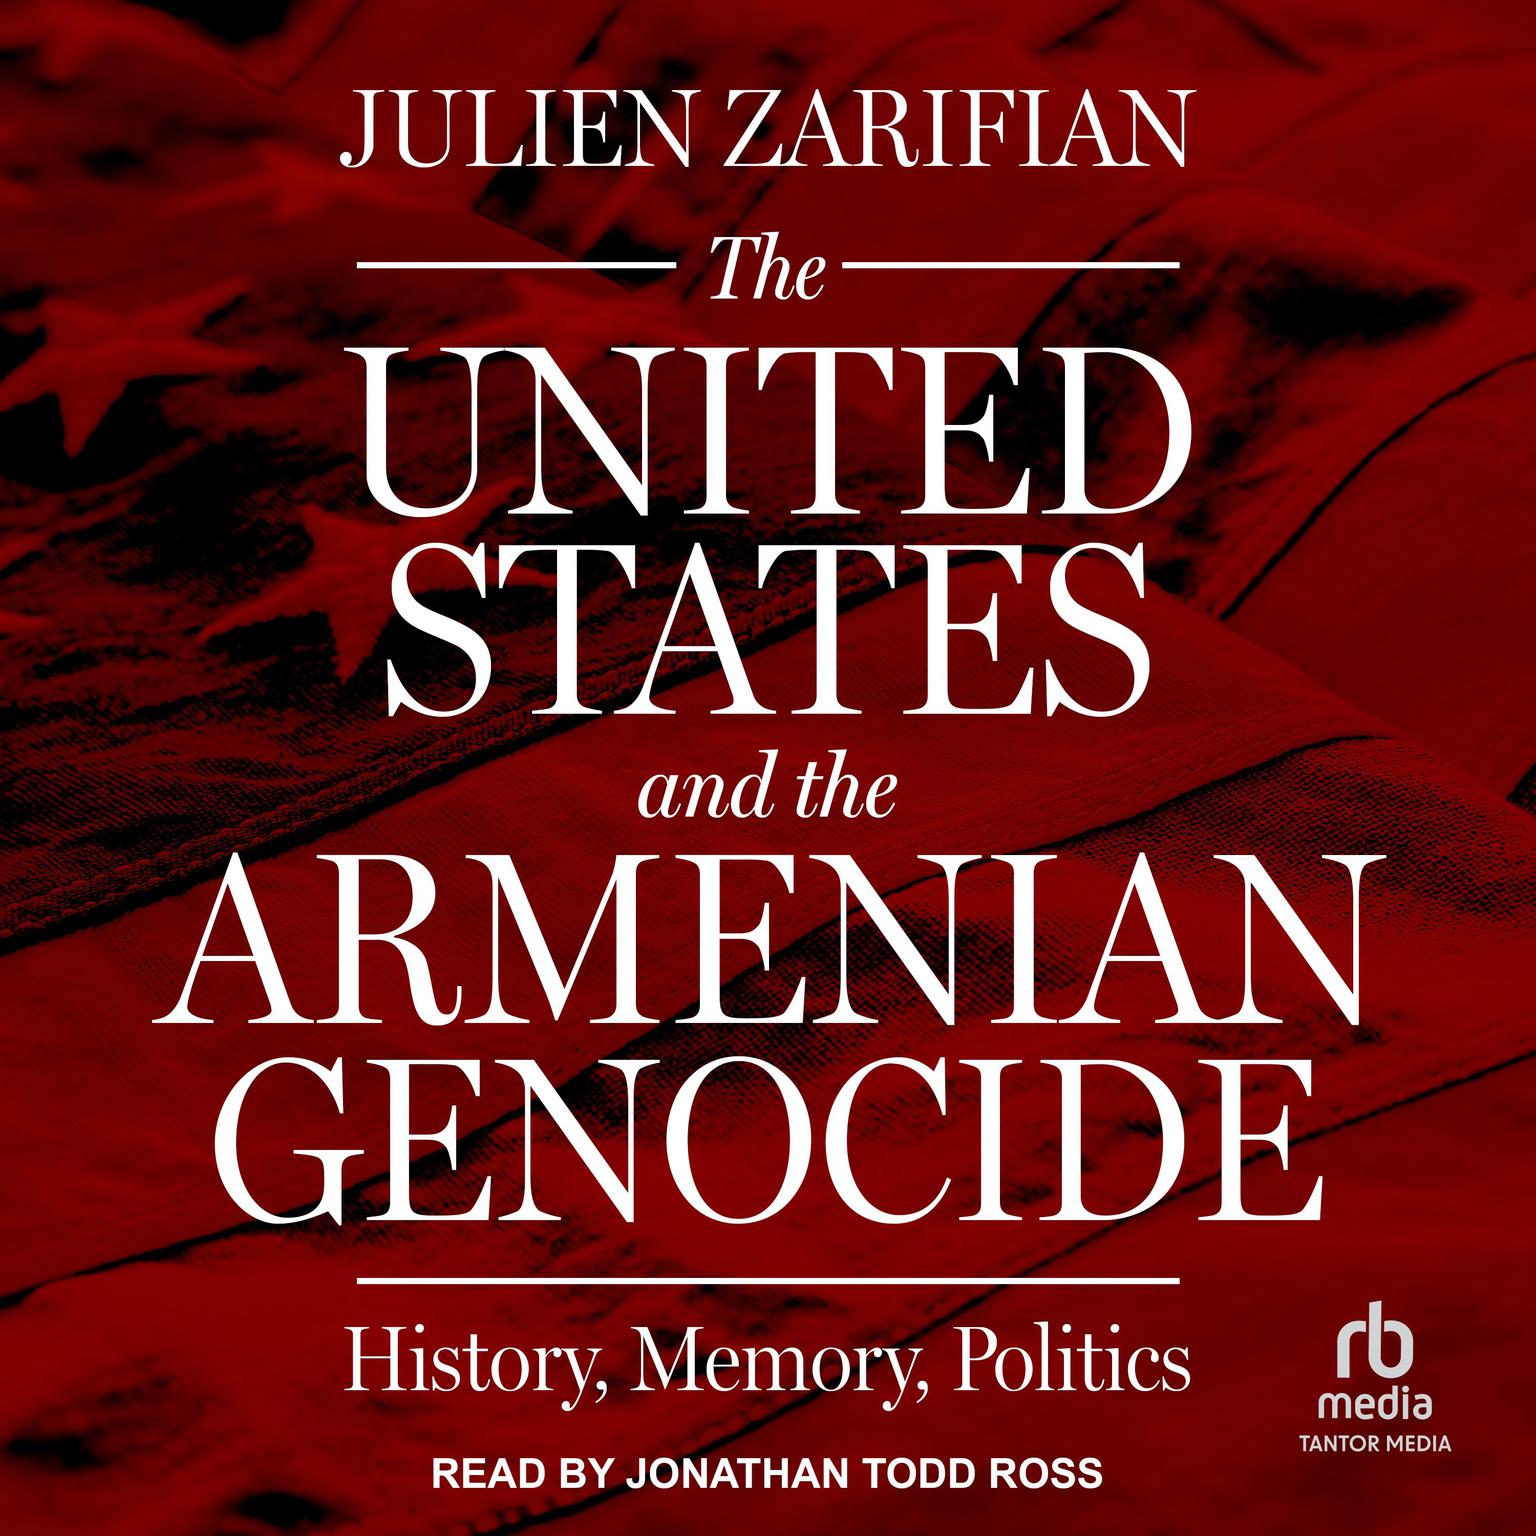 The United States and the Armenian Genocide: History, Memory, Politics Audiobook, by Julien Zarifian